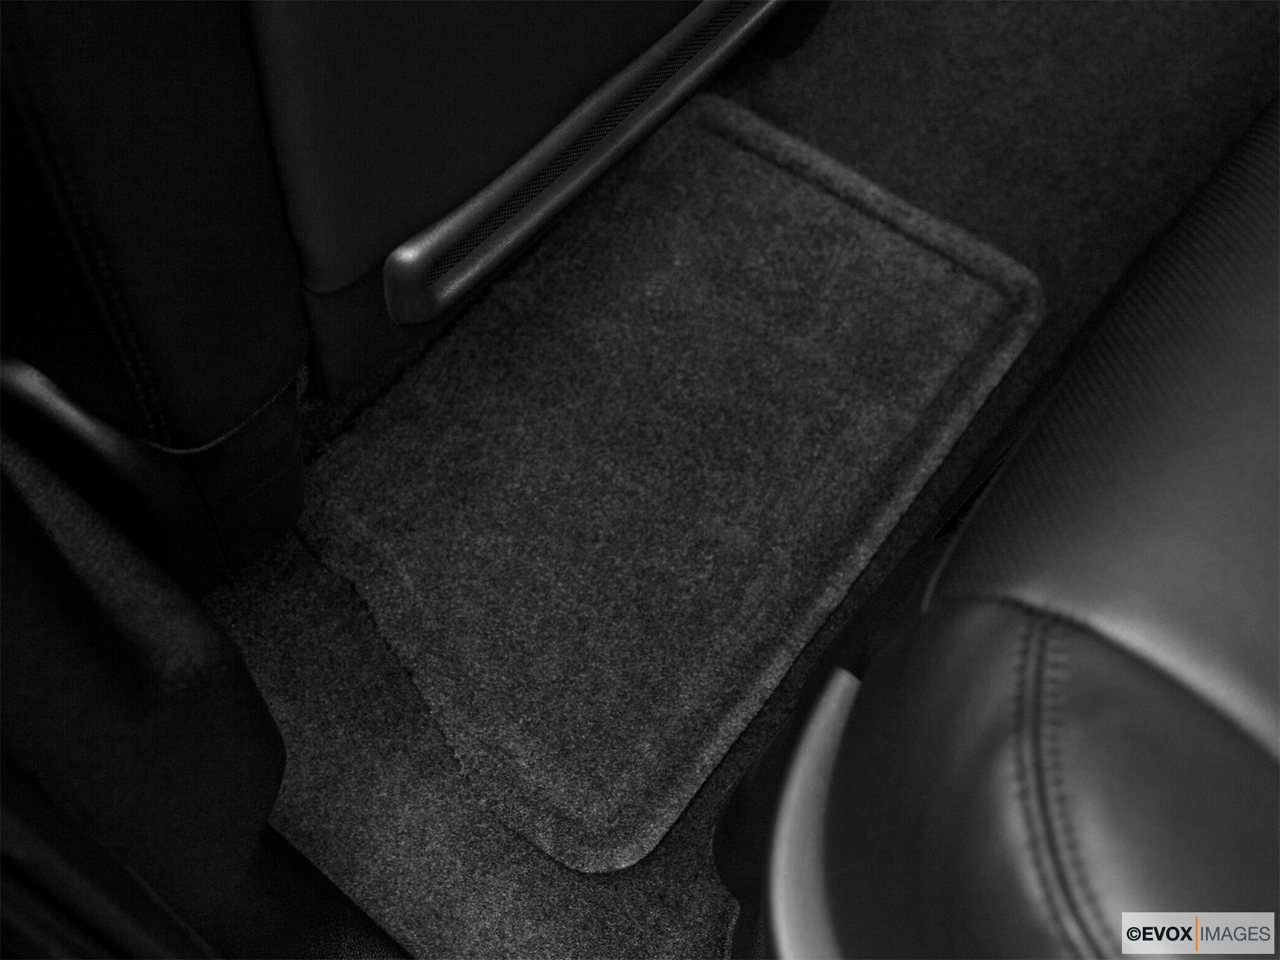 2010 Cadillac Escalade Hybrid Base Rear driver's side floor mat. Mid-seat level from outside looking in. 